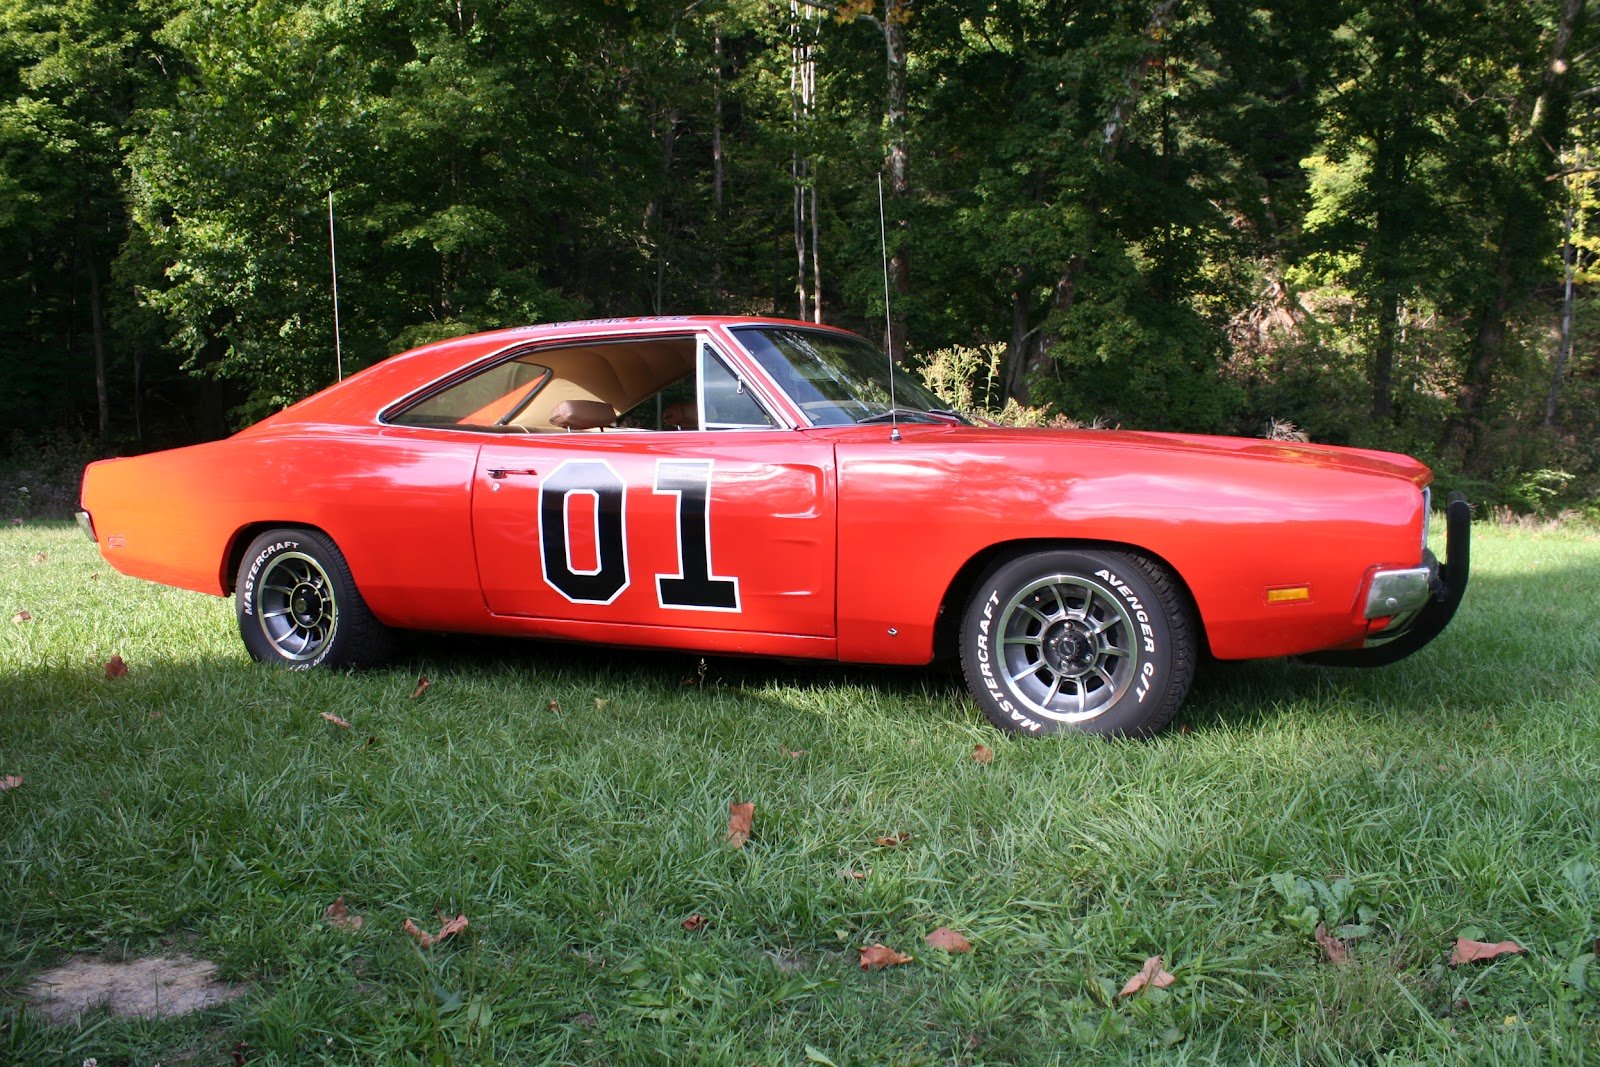 2FastCars: The General Lee